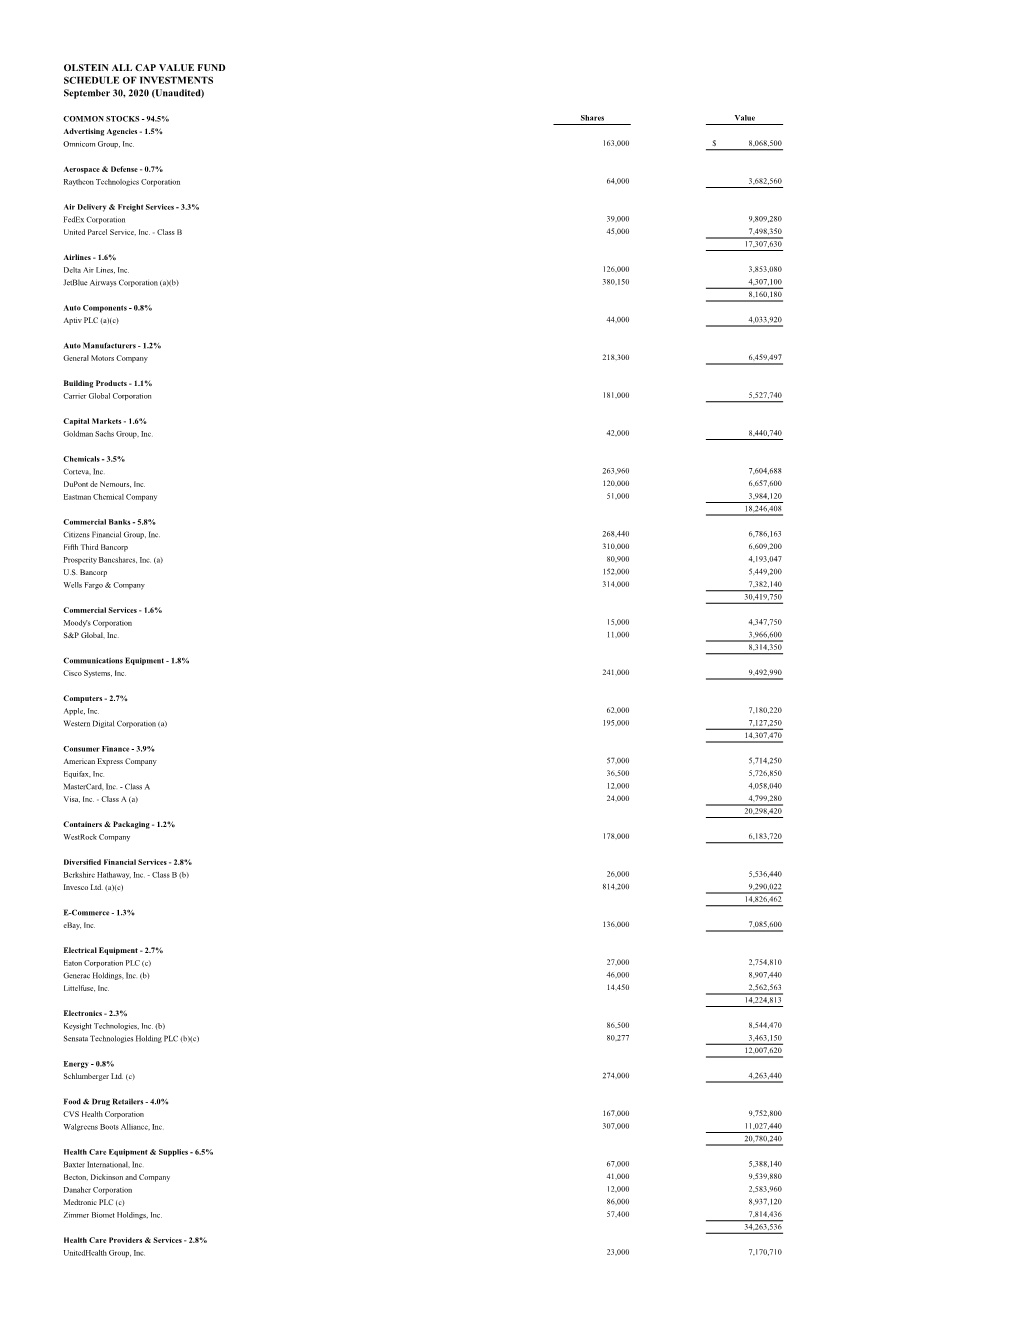 OLSTEIN ALL CAP VALUE FUND SCHEDULE of INVESTMENTS September 30, 2020 (Unaudited)